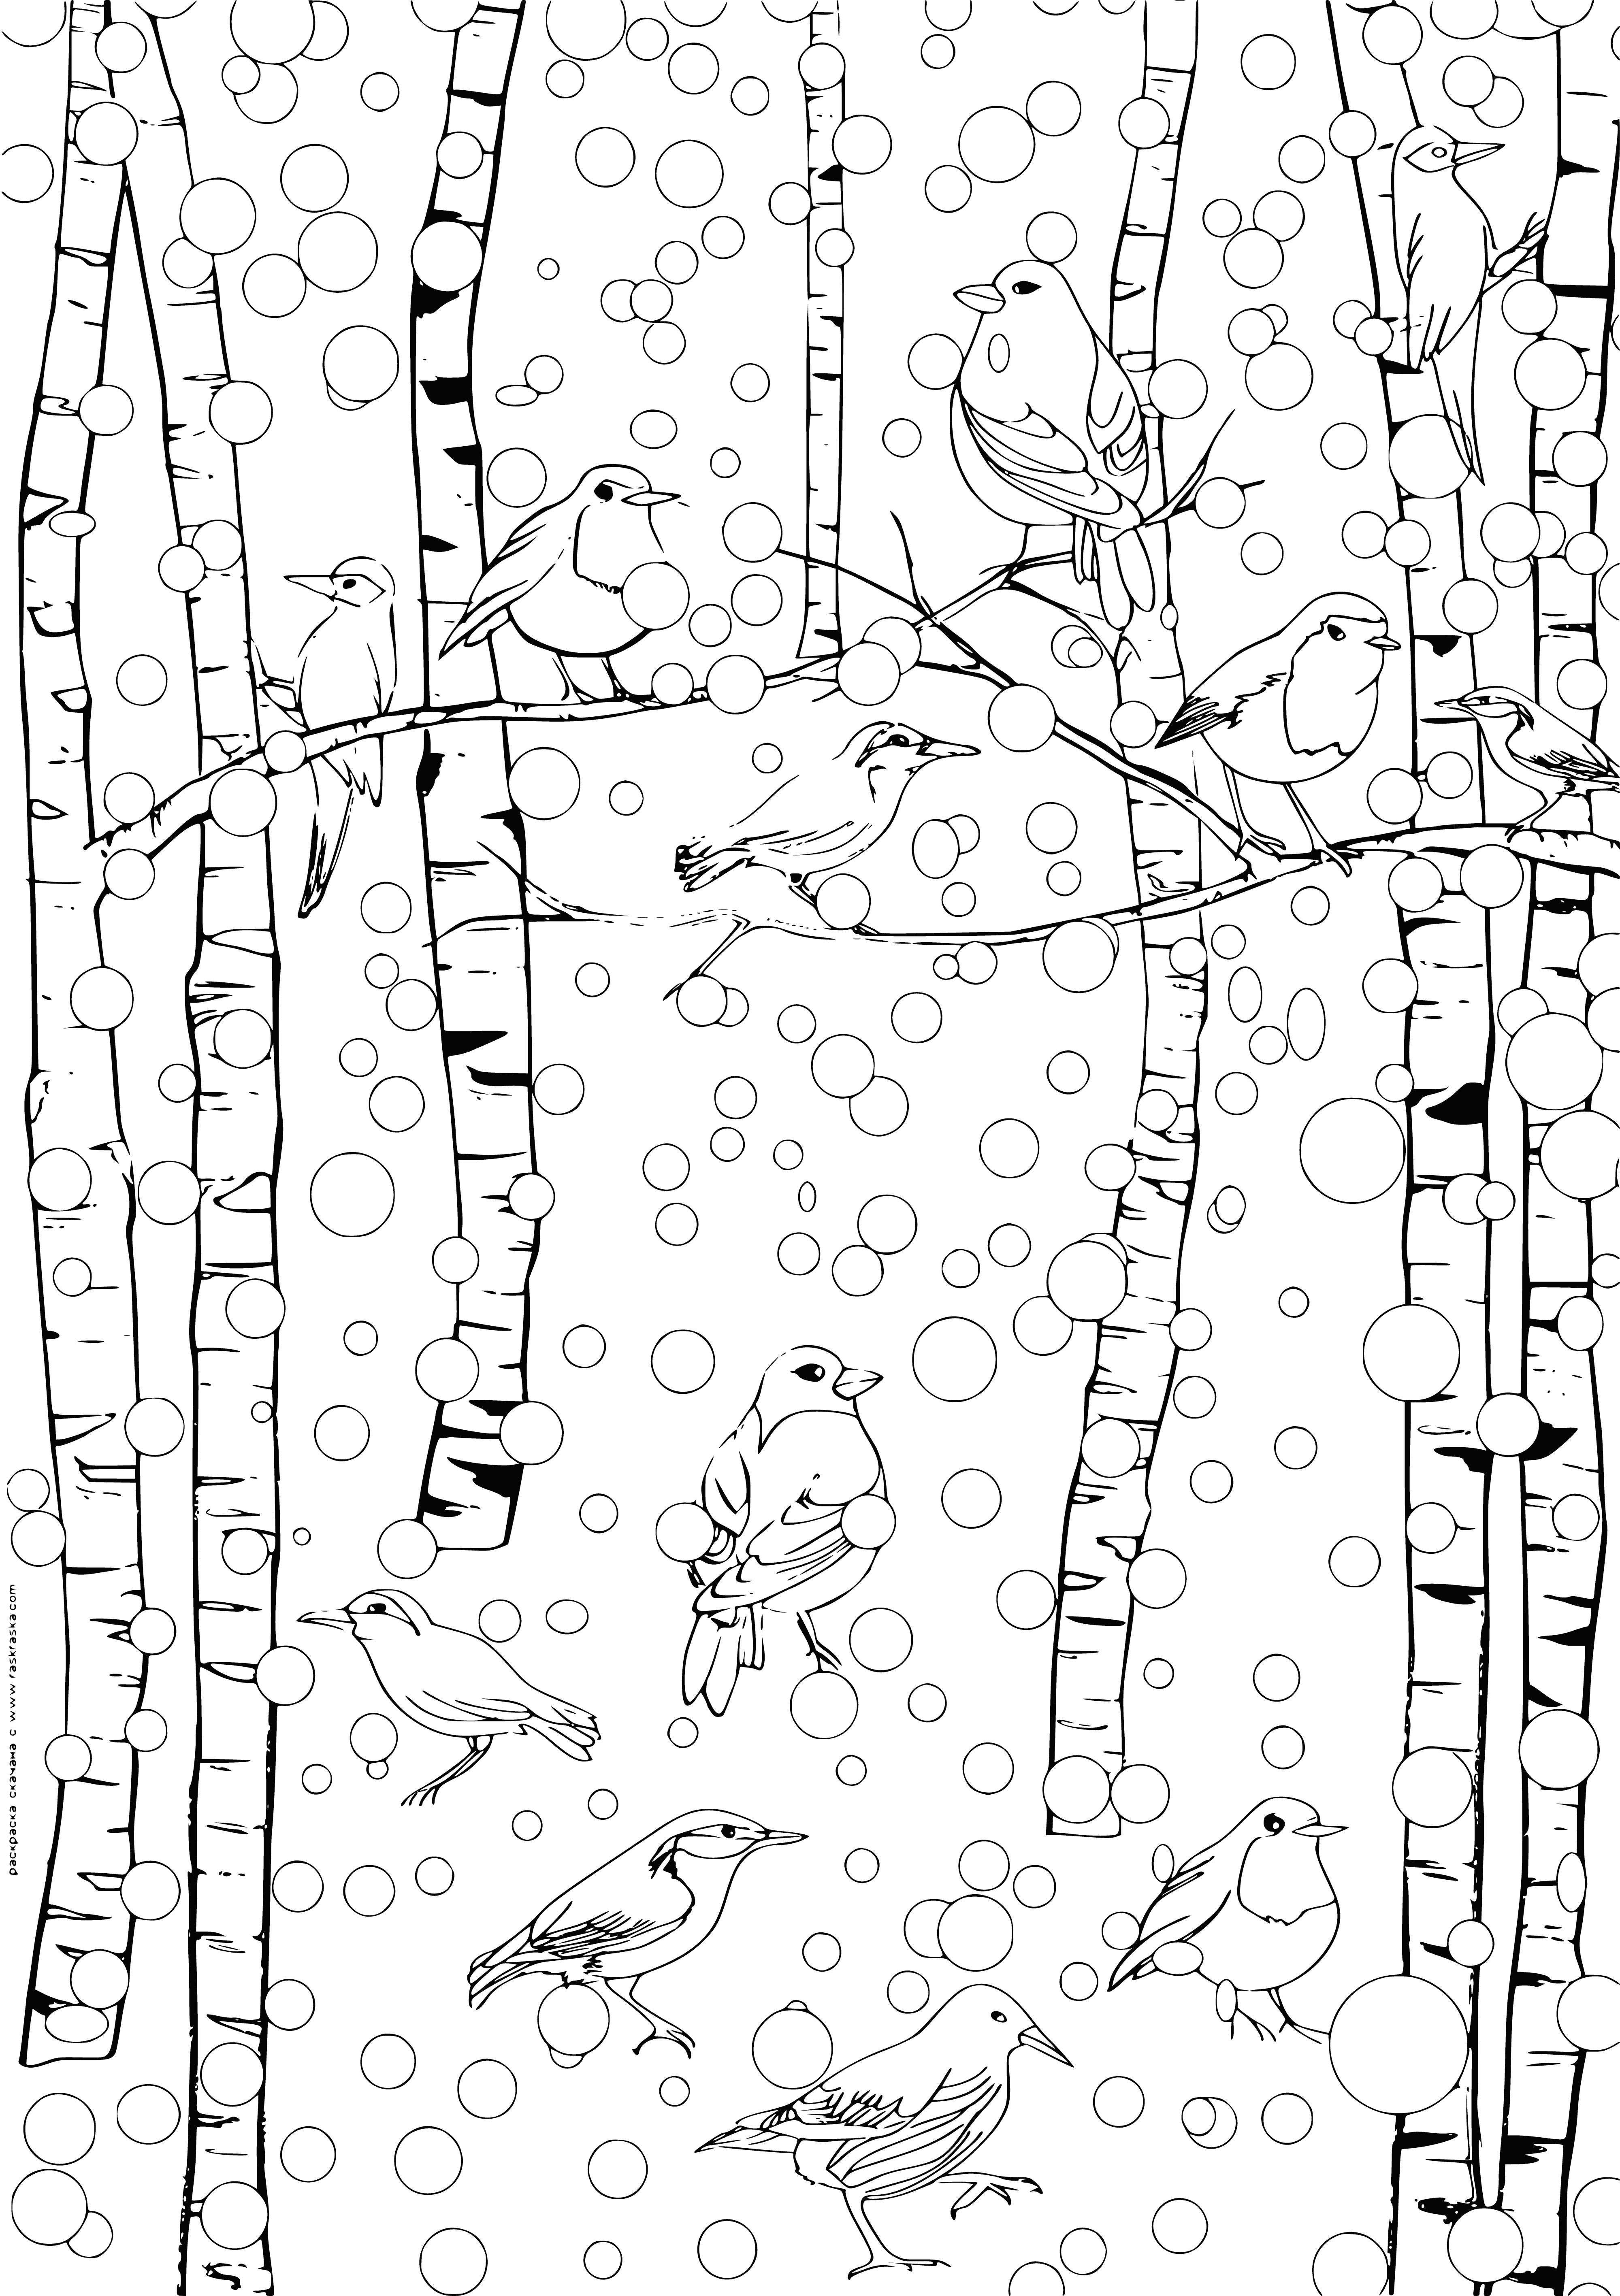 coloring page: Several colorful birds in a winter forest, with wings & beaks open, stand on tree branches & in the snow.